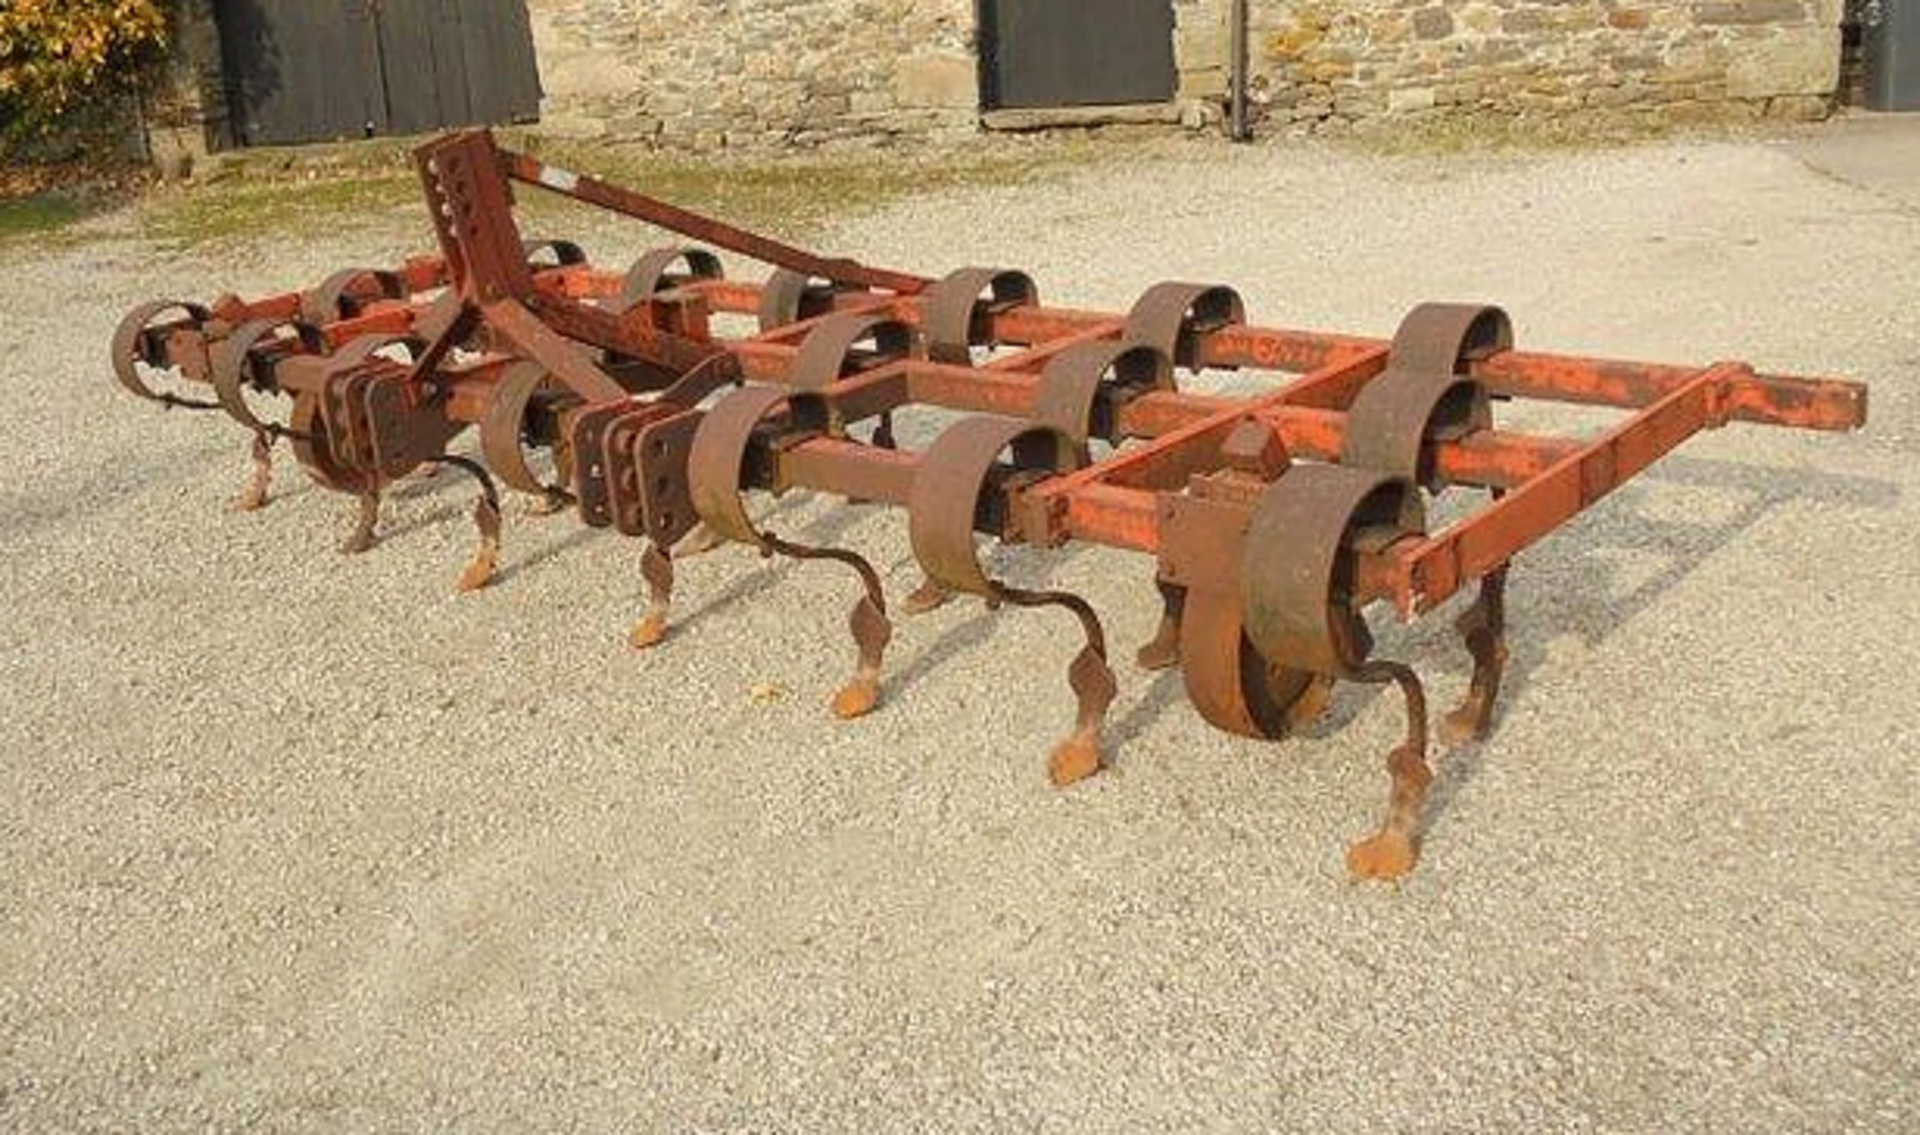 Browns 4.4m / 14 Foot Spring Tine Cultivator